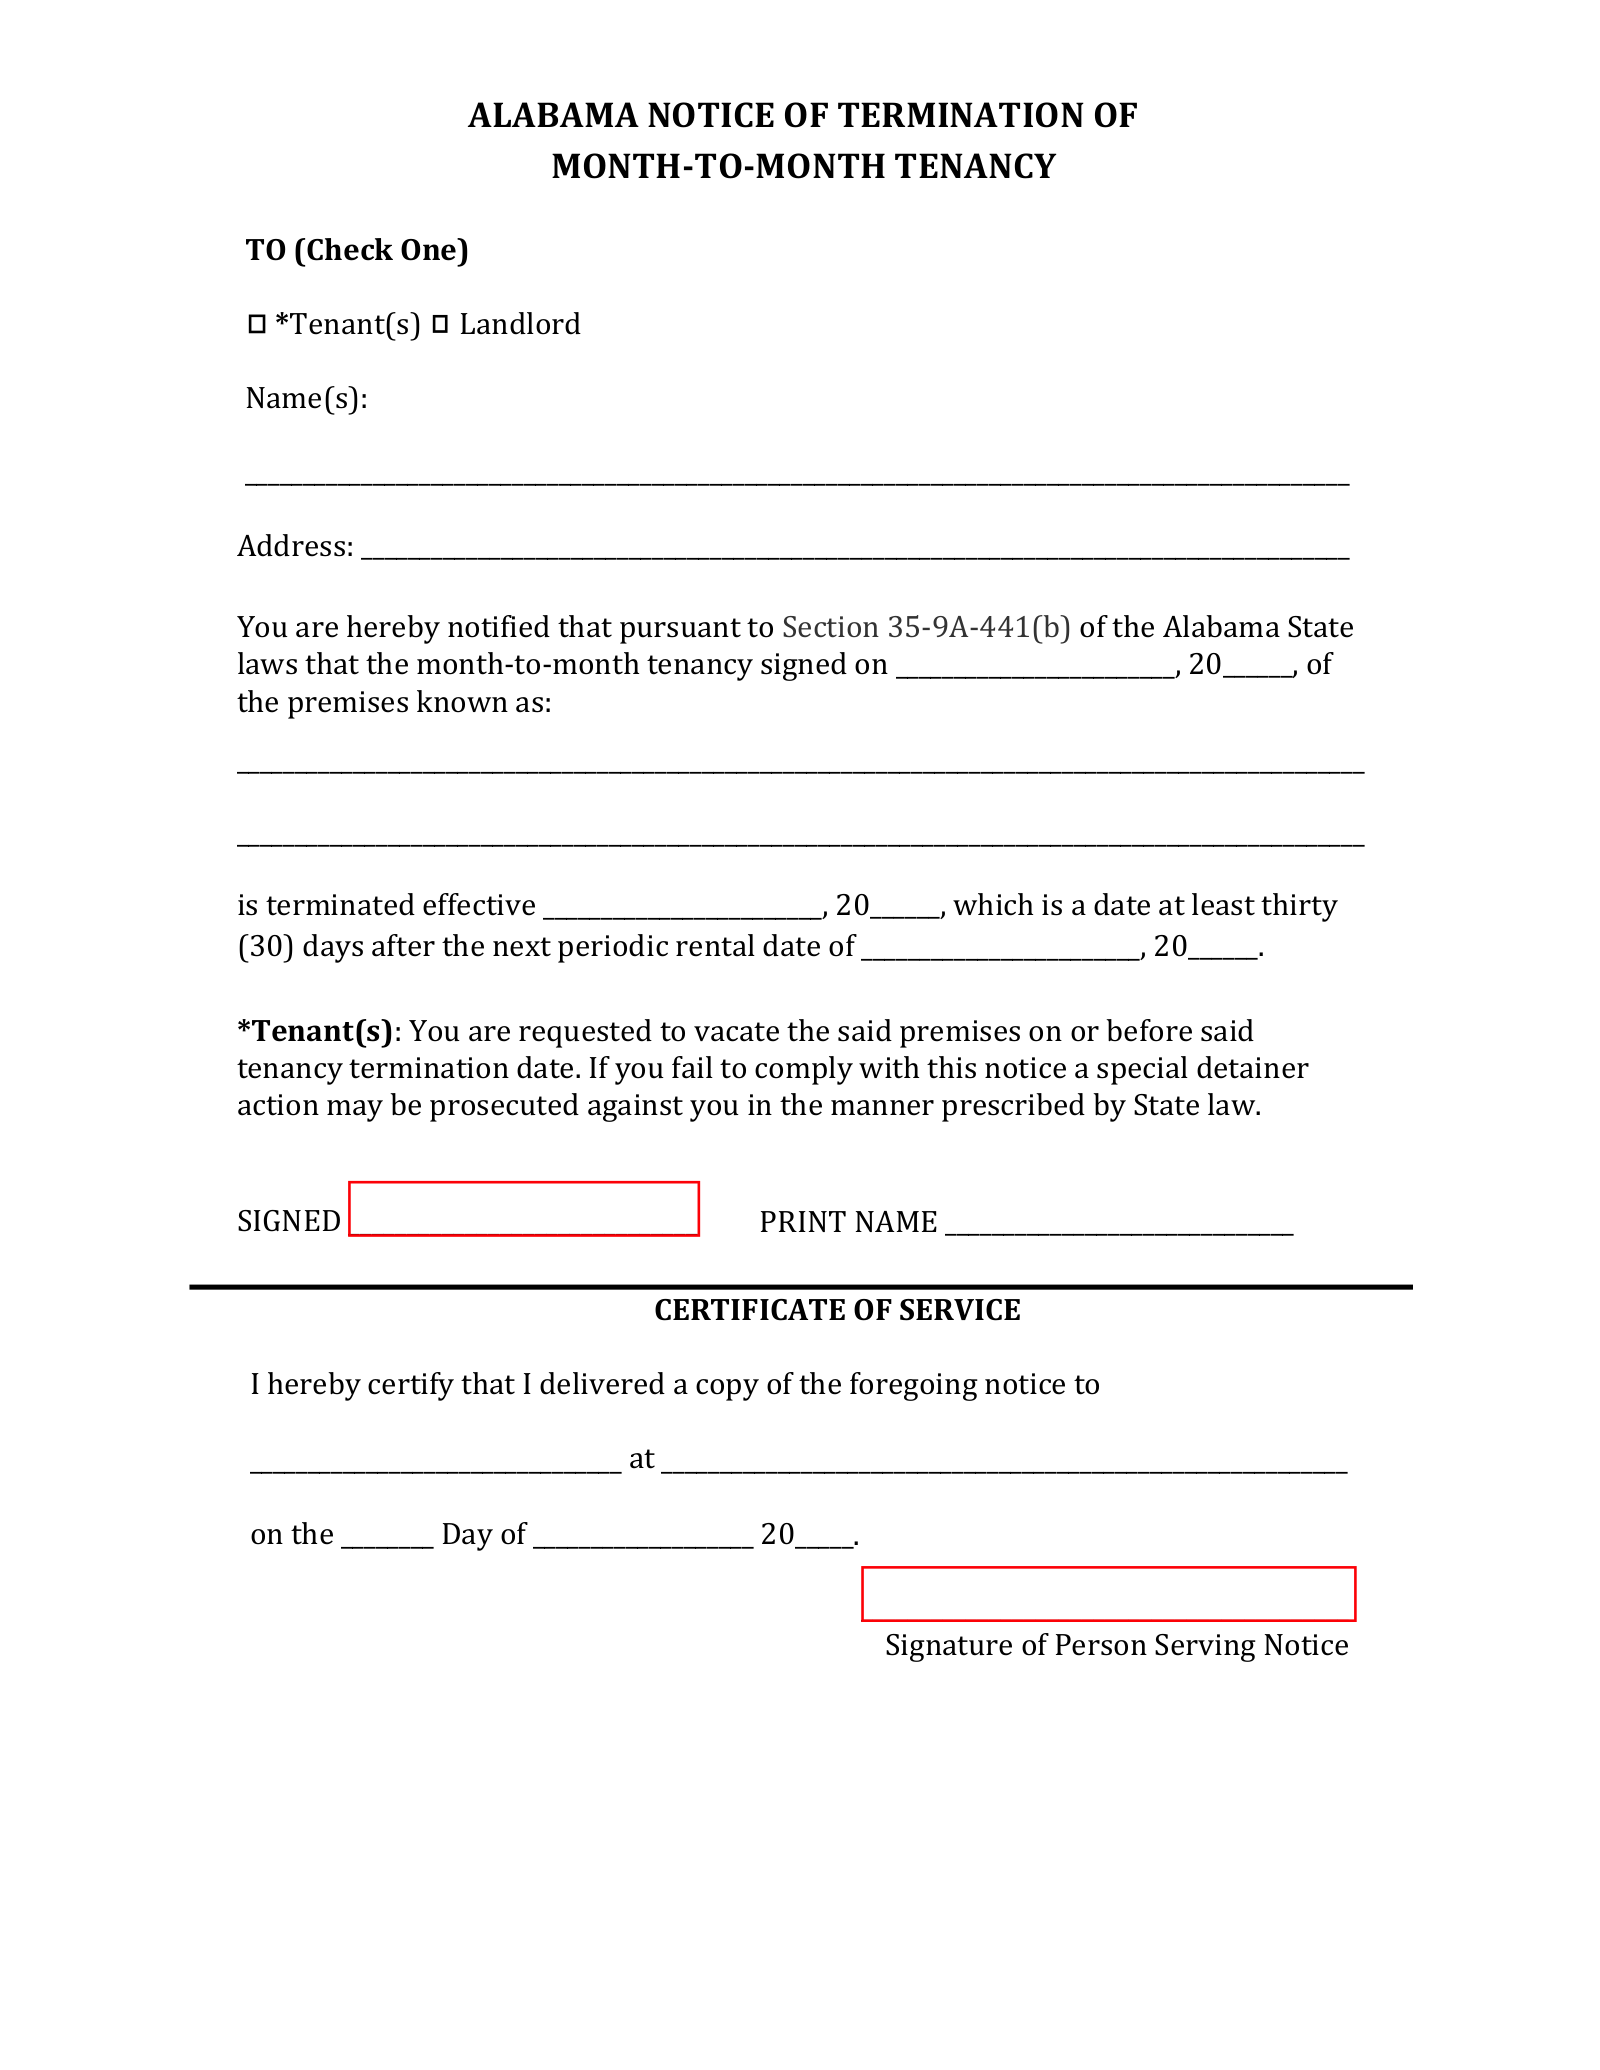 Alabama Lease Termination Letter Form | 30-Day Notice